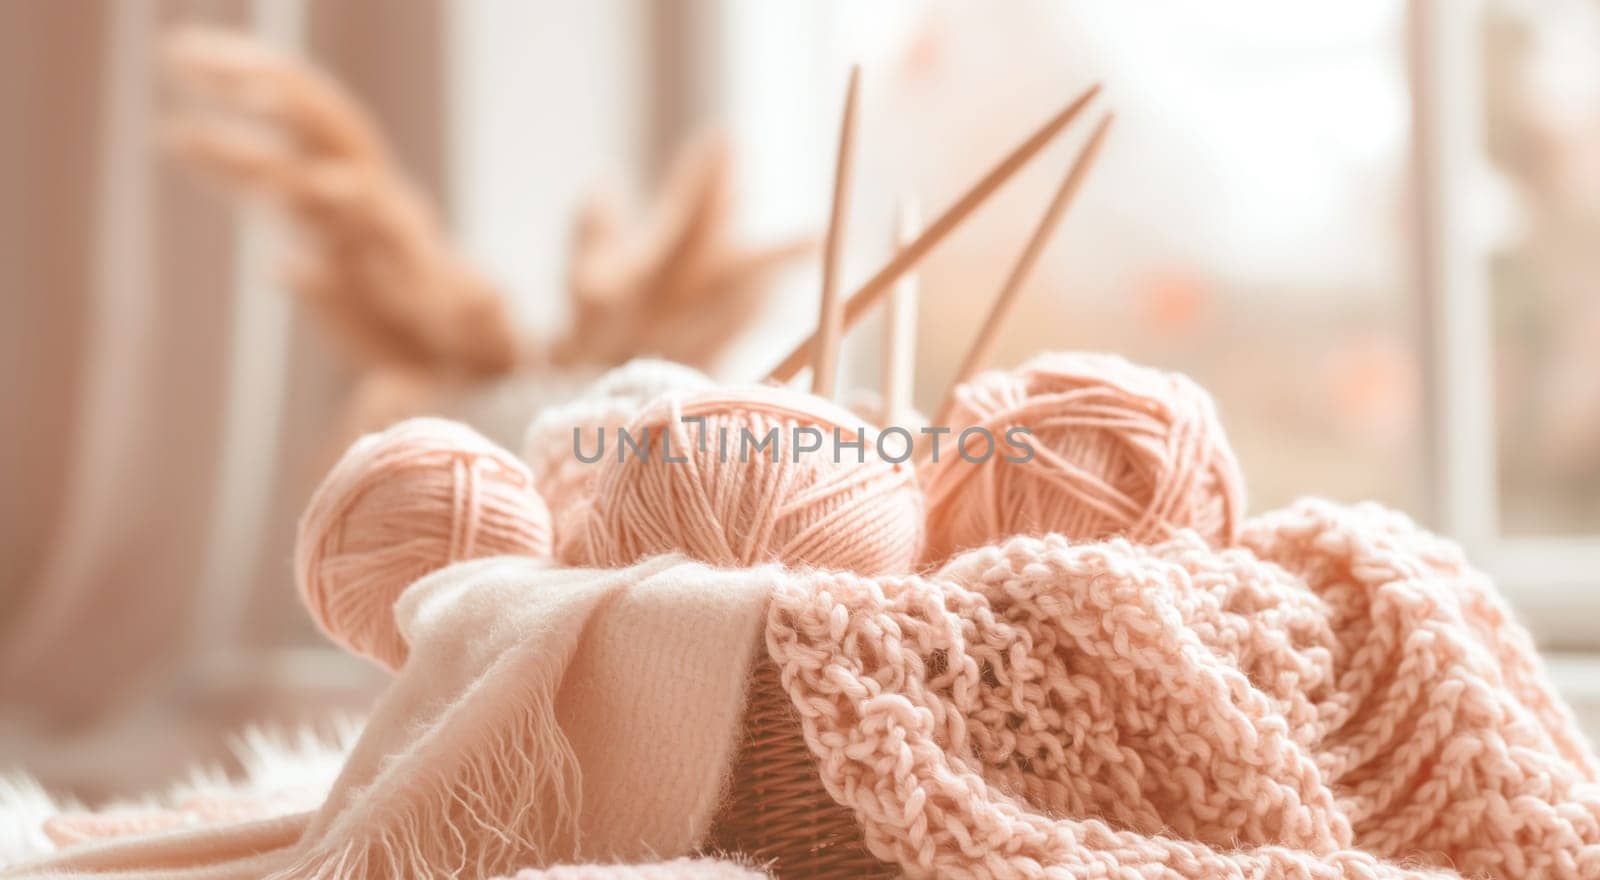 Knitting needles and yarn balls in basket with soft focus. High quality photo